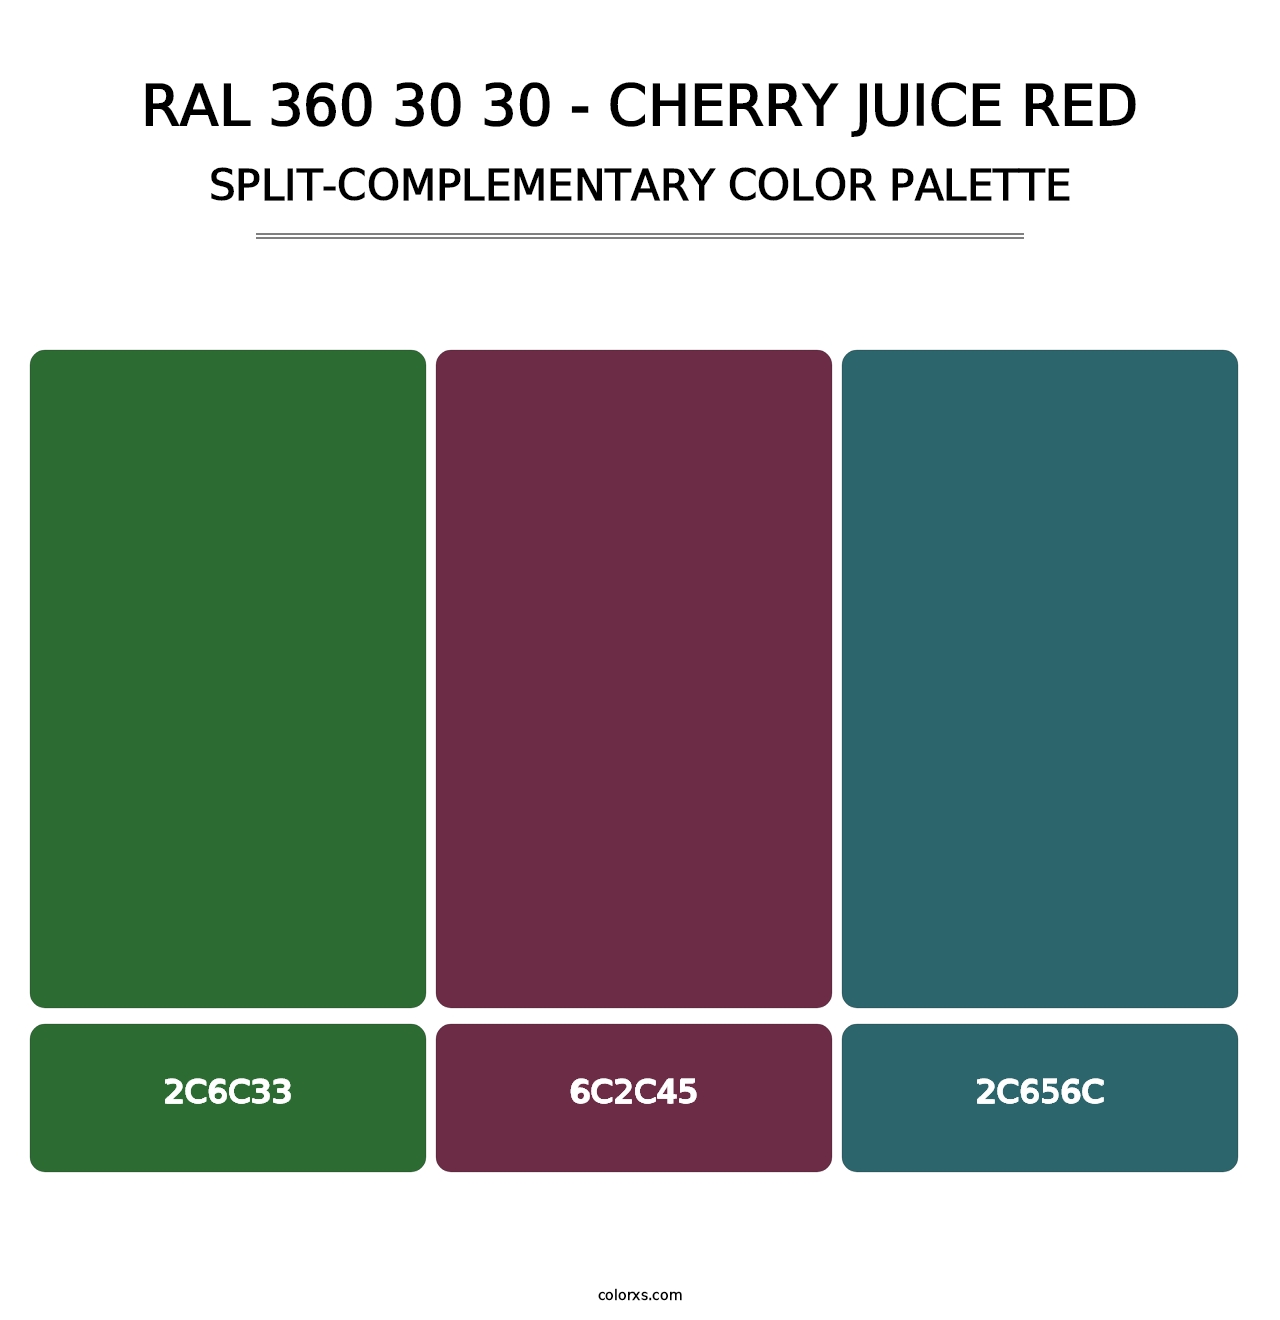 RAL 360 30 30 - Cherry Juice Red - Split-Complementary Color Palette